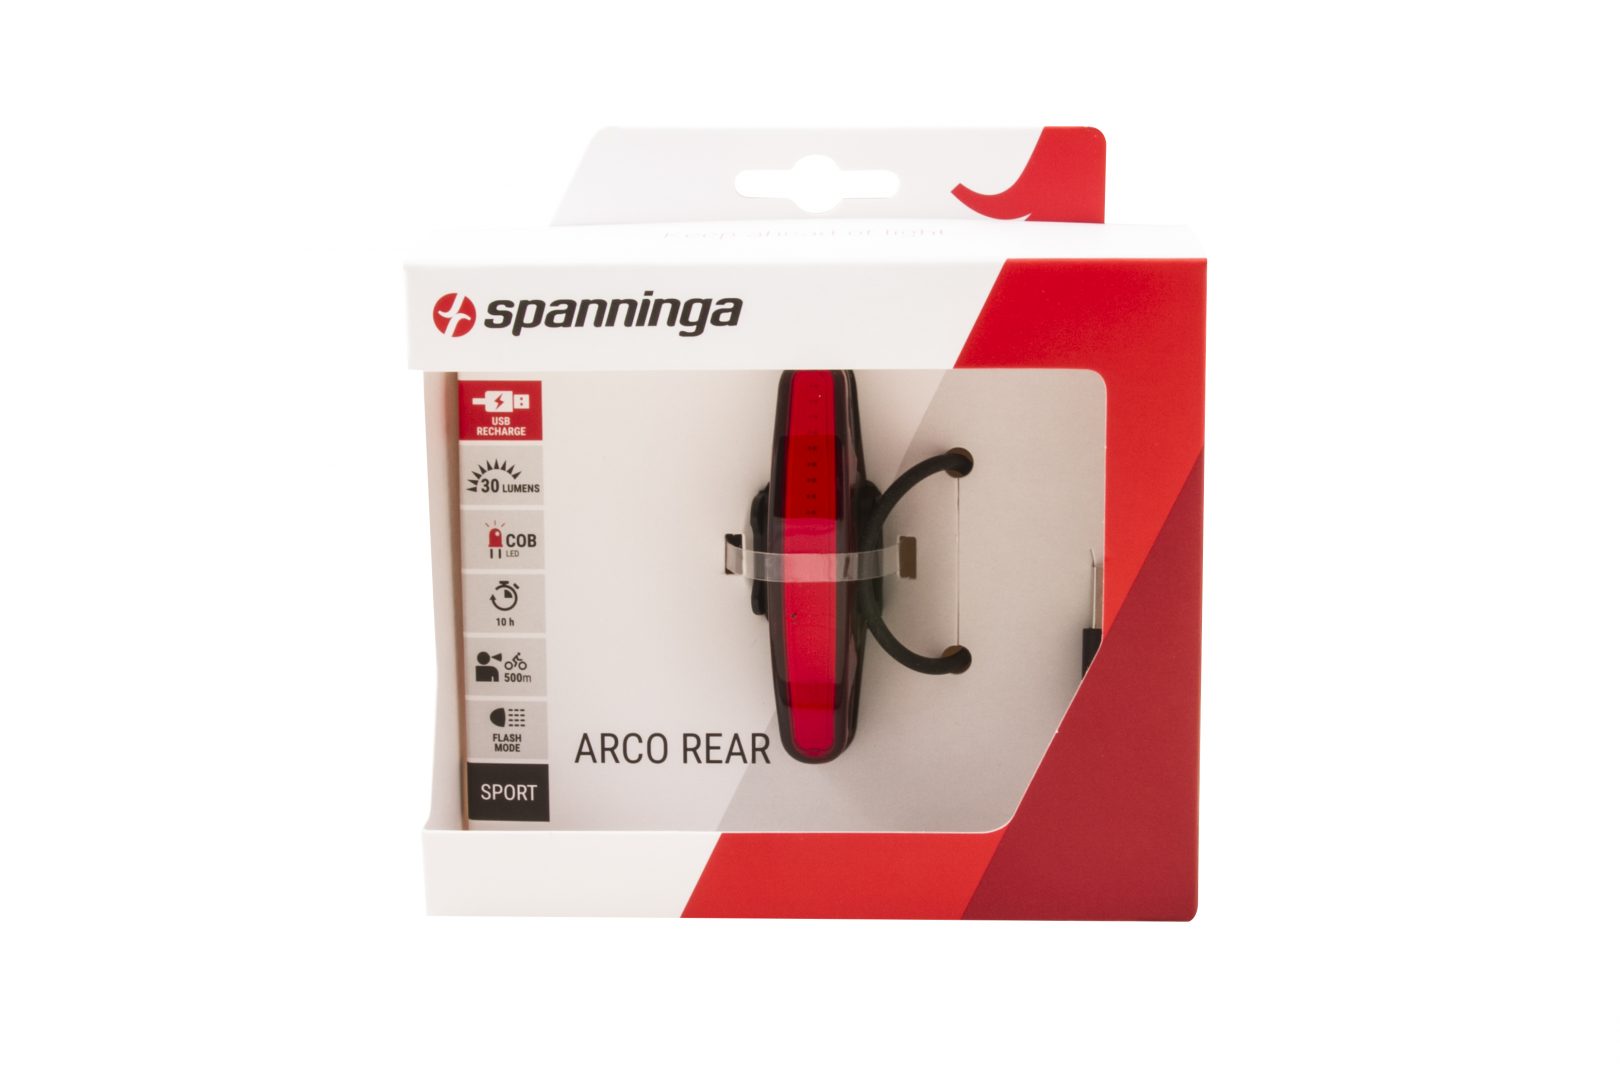 Arco Rear rearlight package front